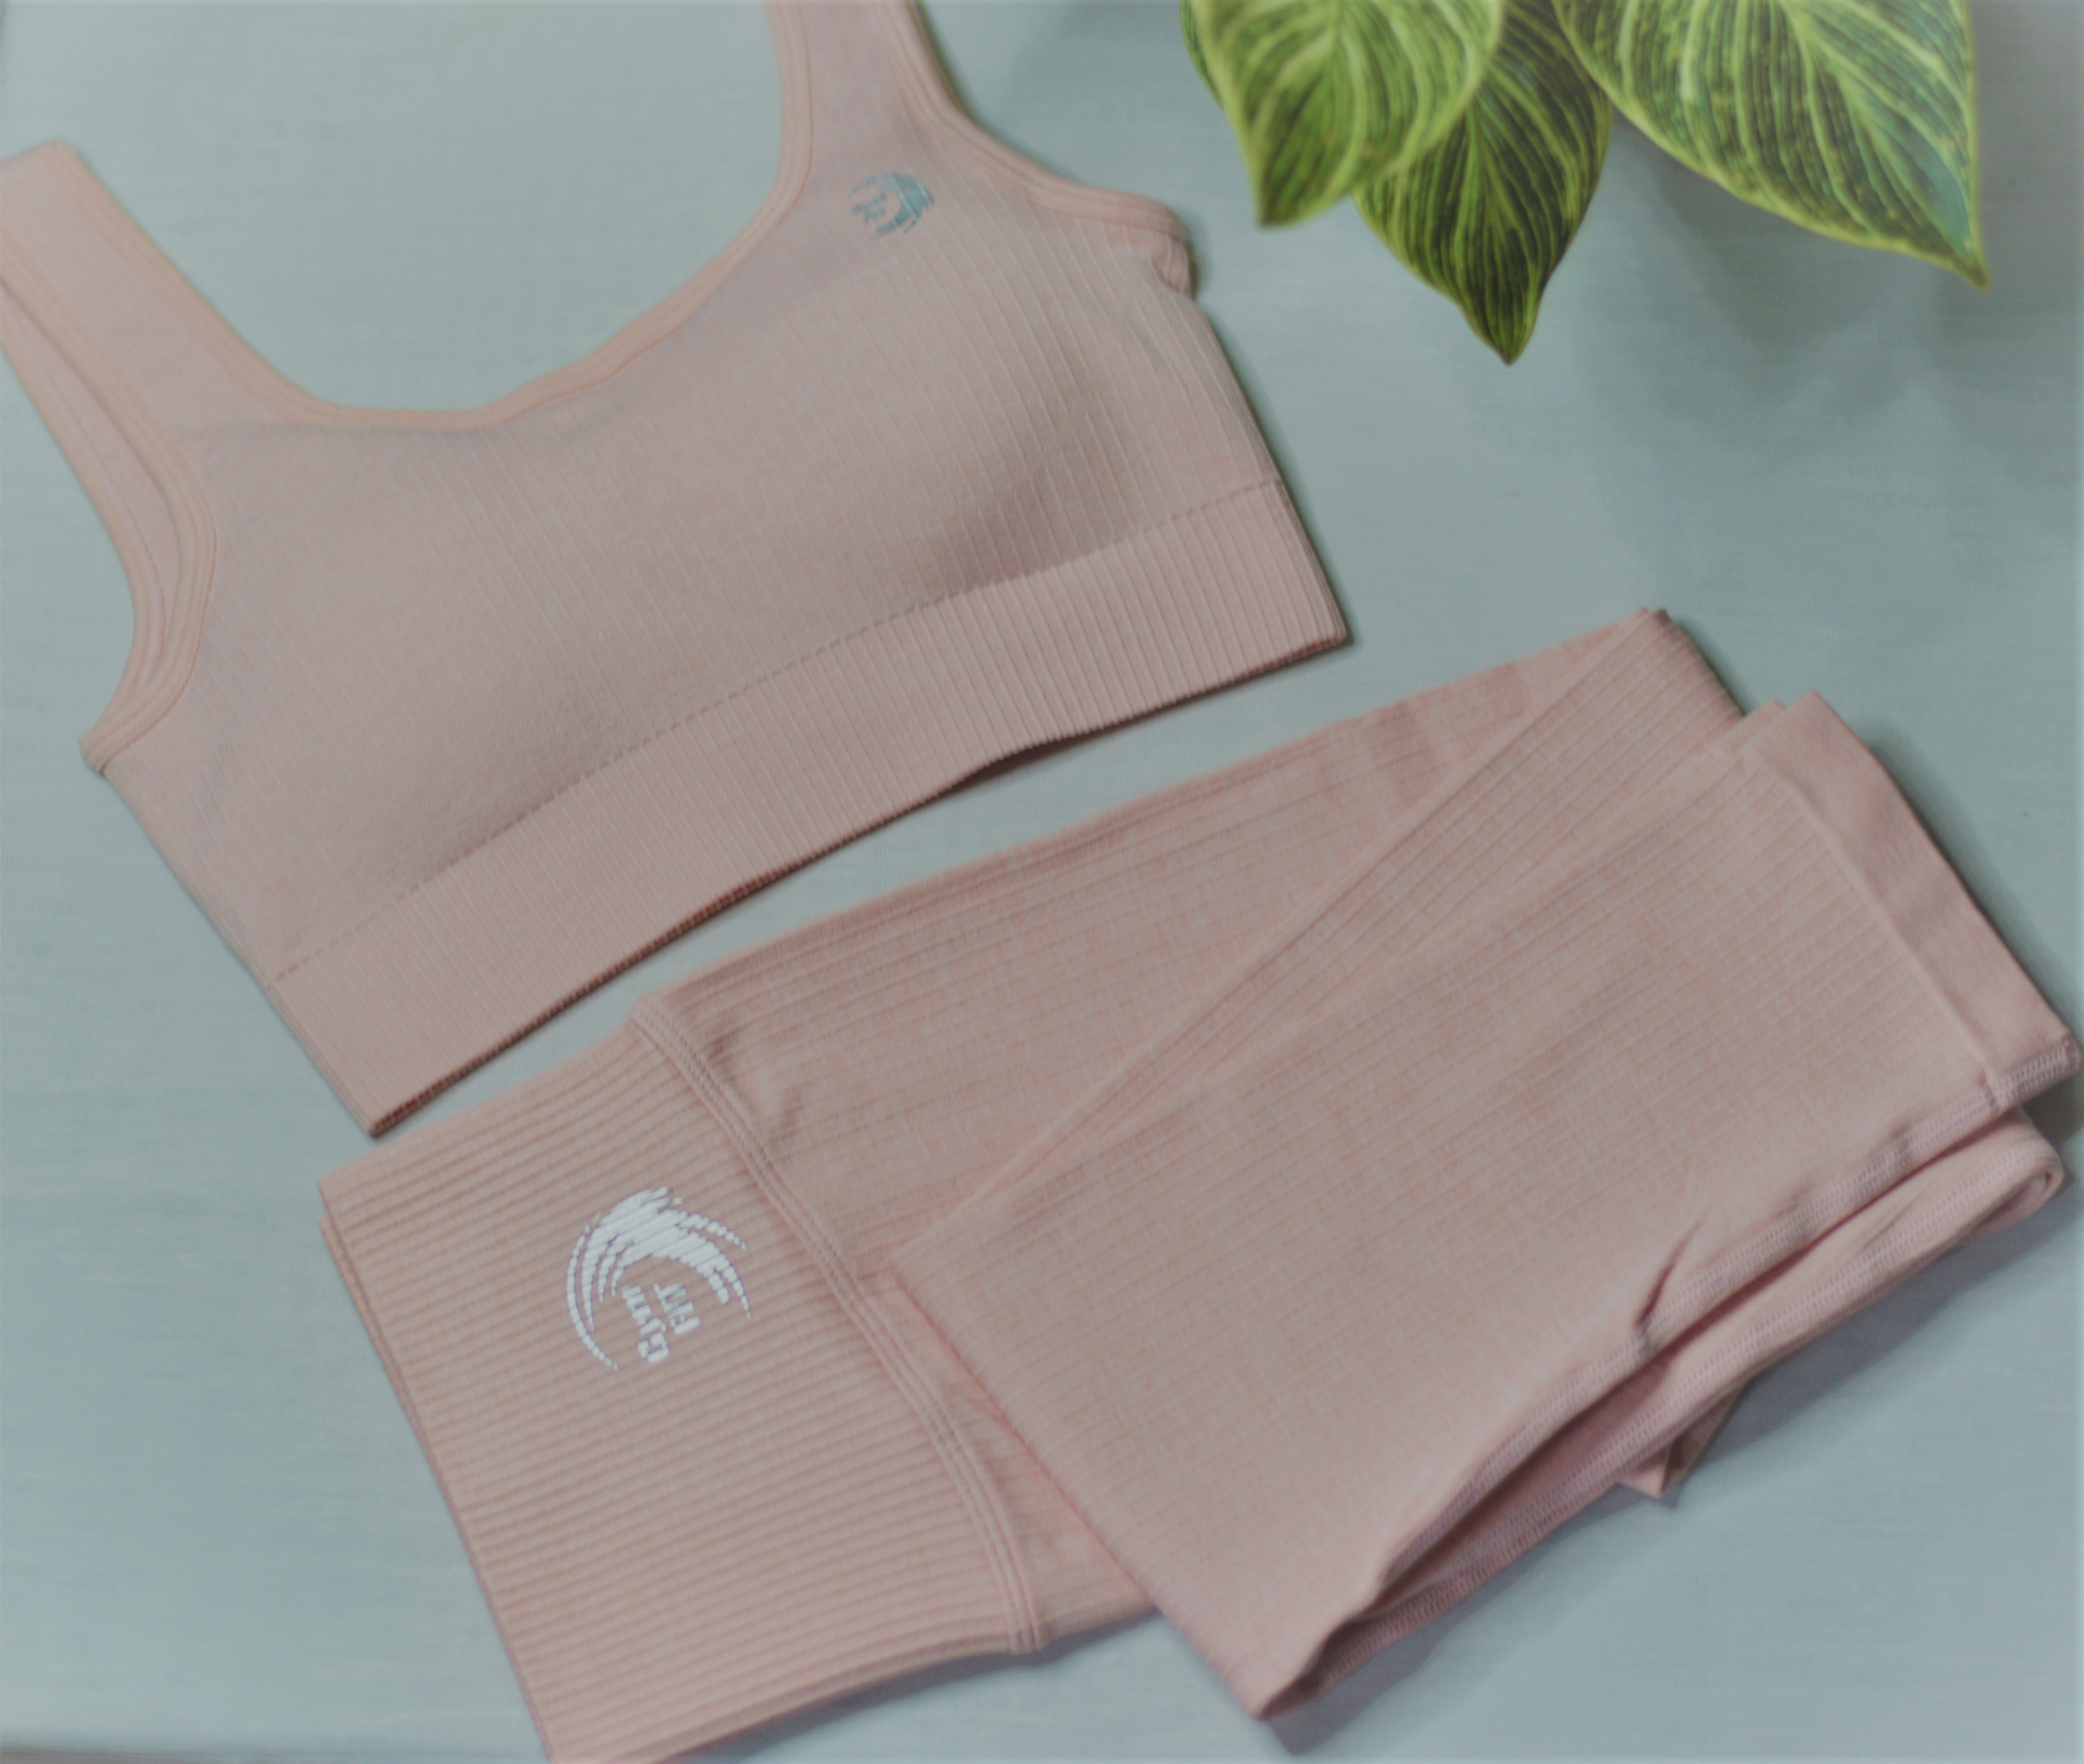 'CLASSIC' Knit Seamless set in Apricot